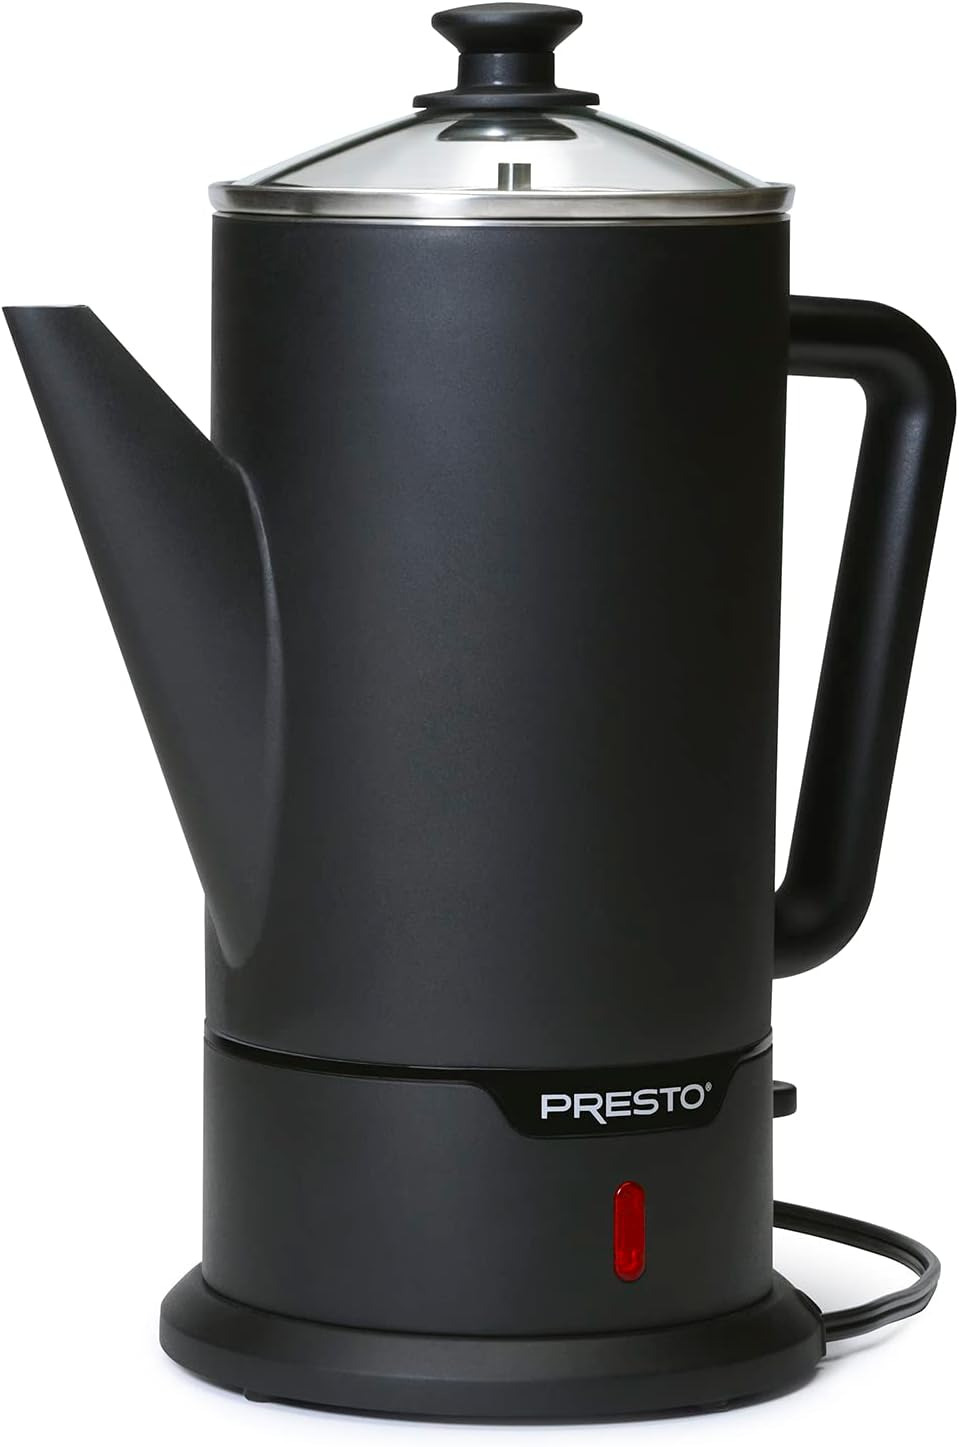 02815 12-Cup Cordless Stainless Steel Coffee Percolator - Modern Design, Easy Po